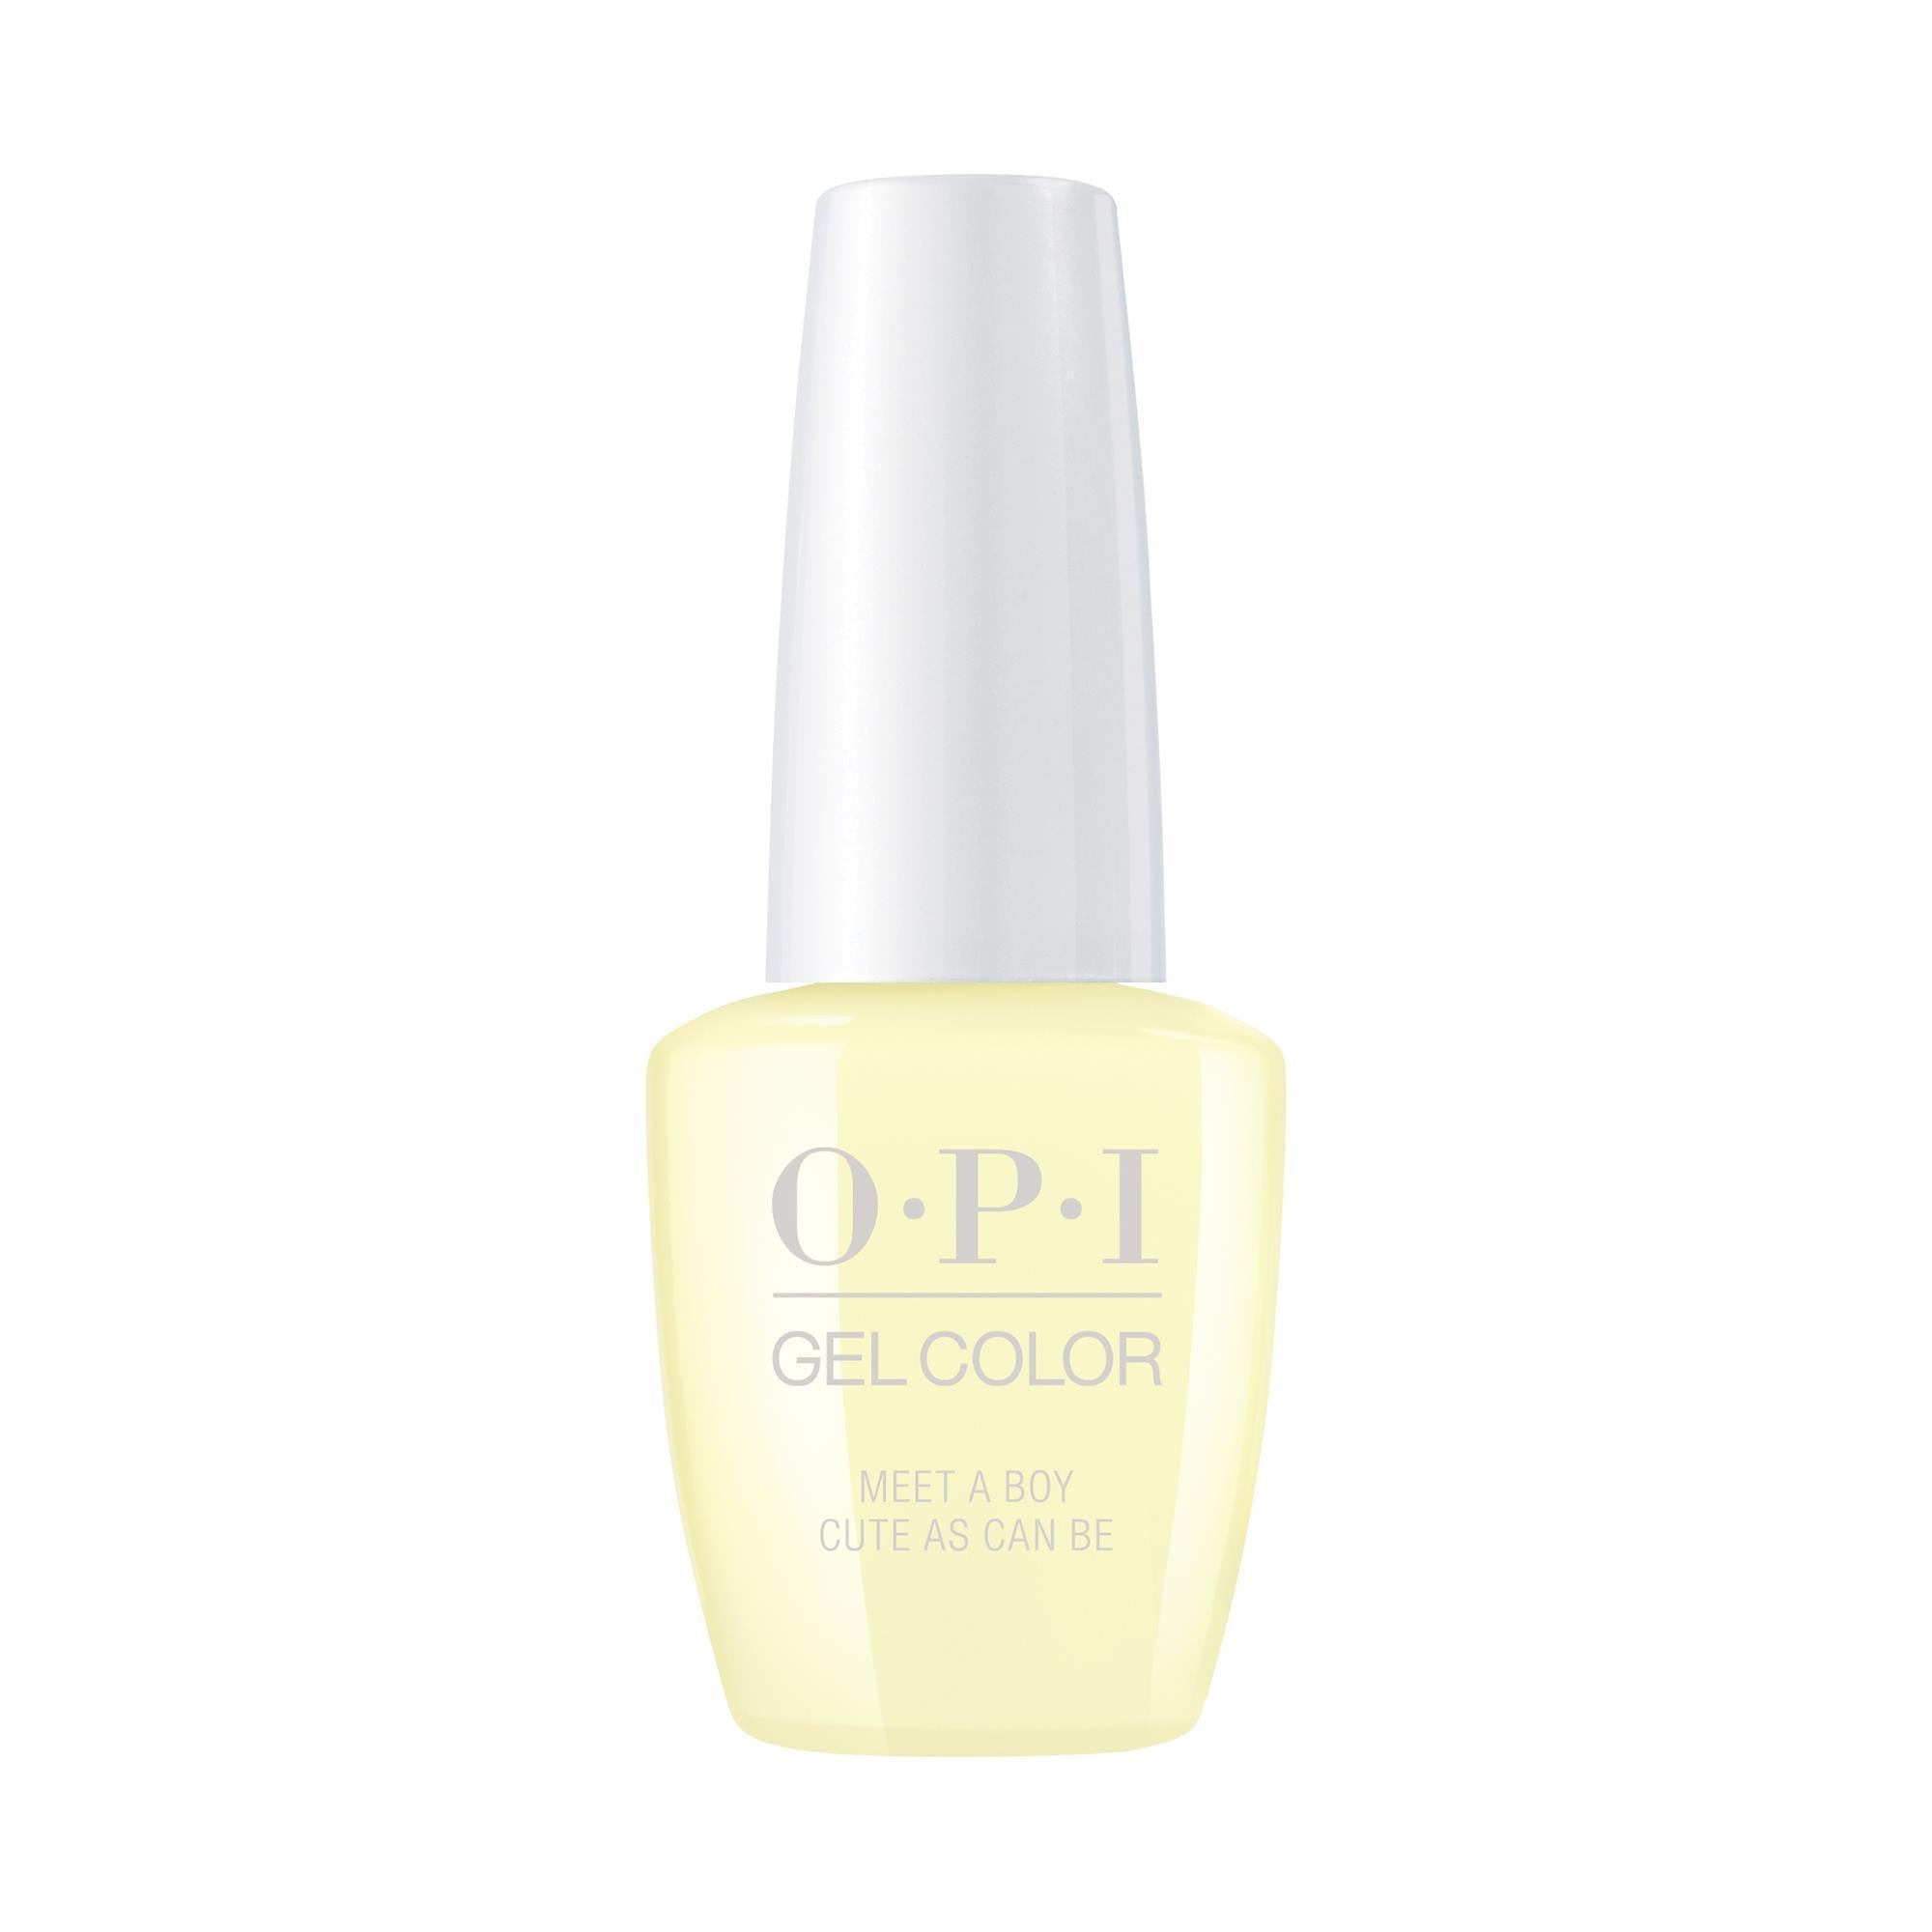 Nail Lacquer & Polish Meet a Boy Cute As Can Be OPI Grease Collection/Gel